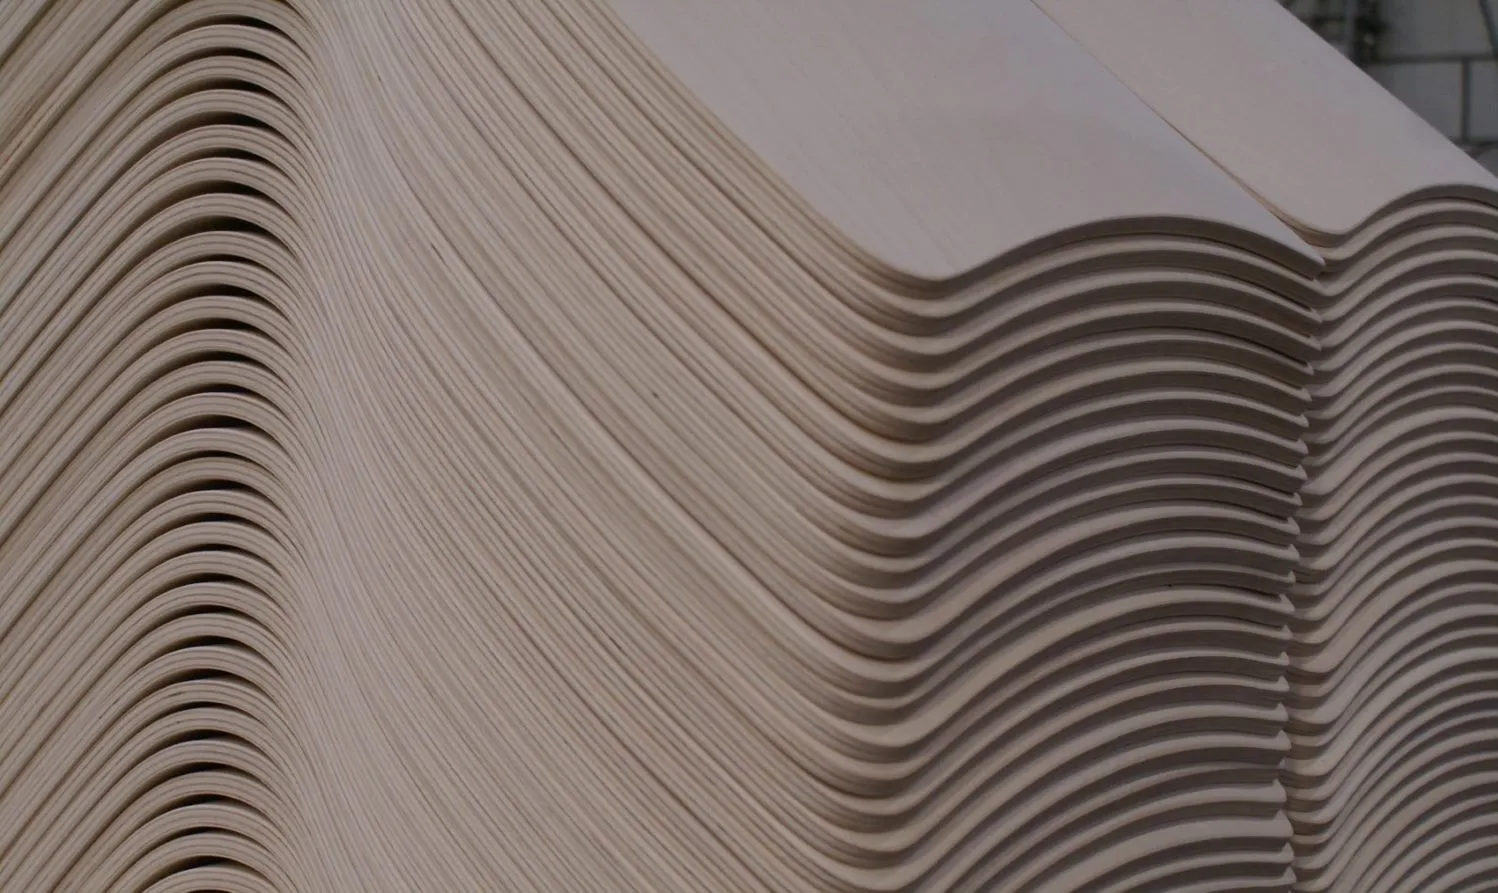 formed plywood